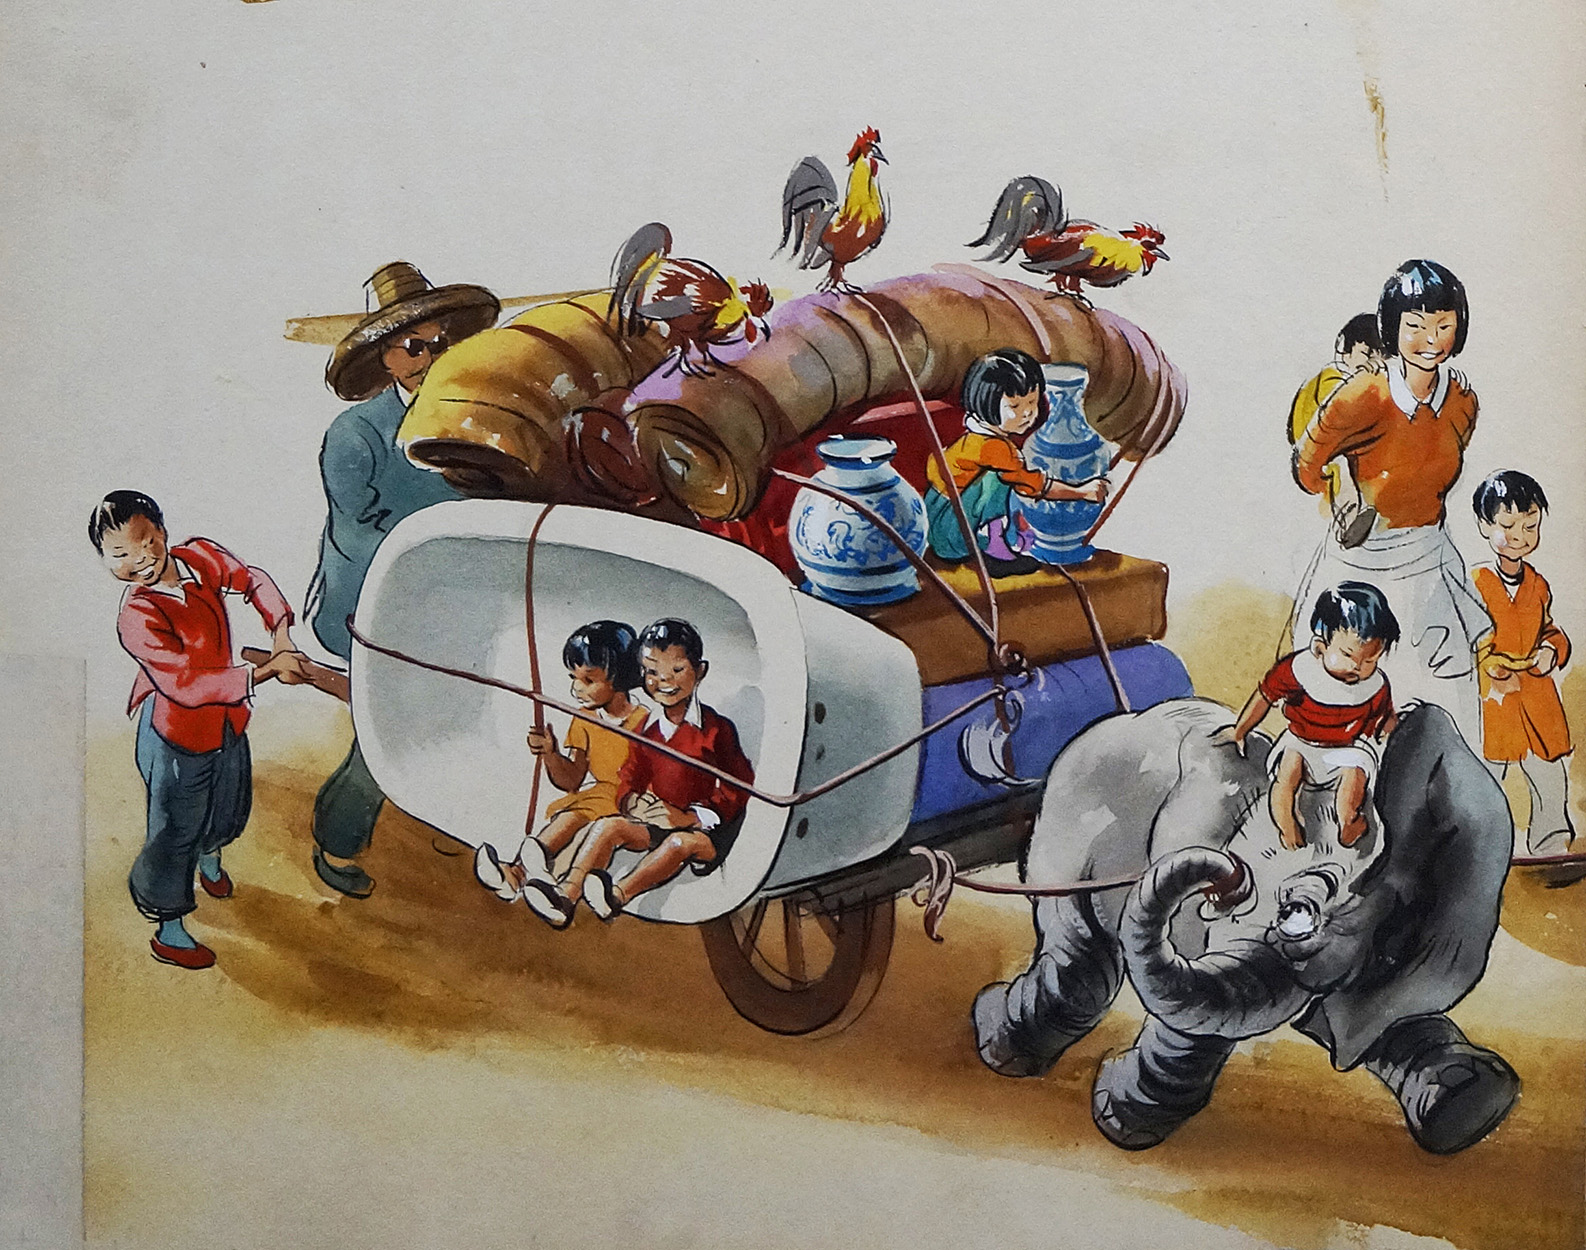 Ming Vase Transport (Original) art by Wee Willie Winkie (Worsley) at The Illustration Art Gallery